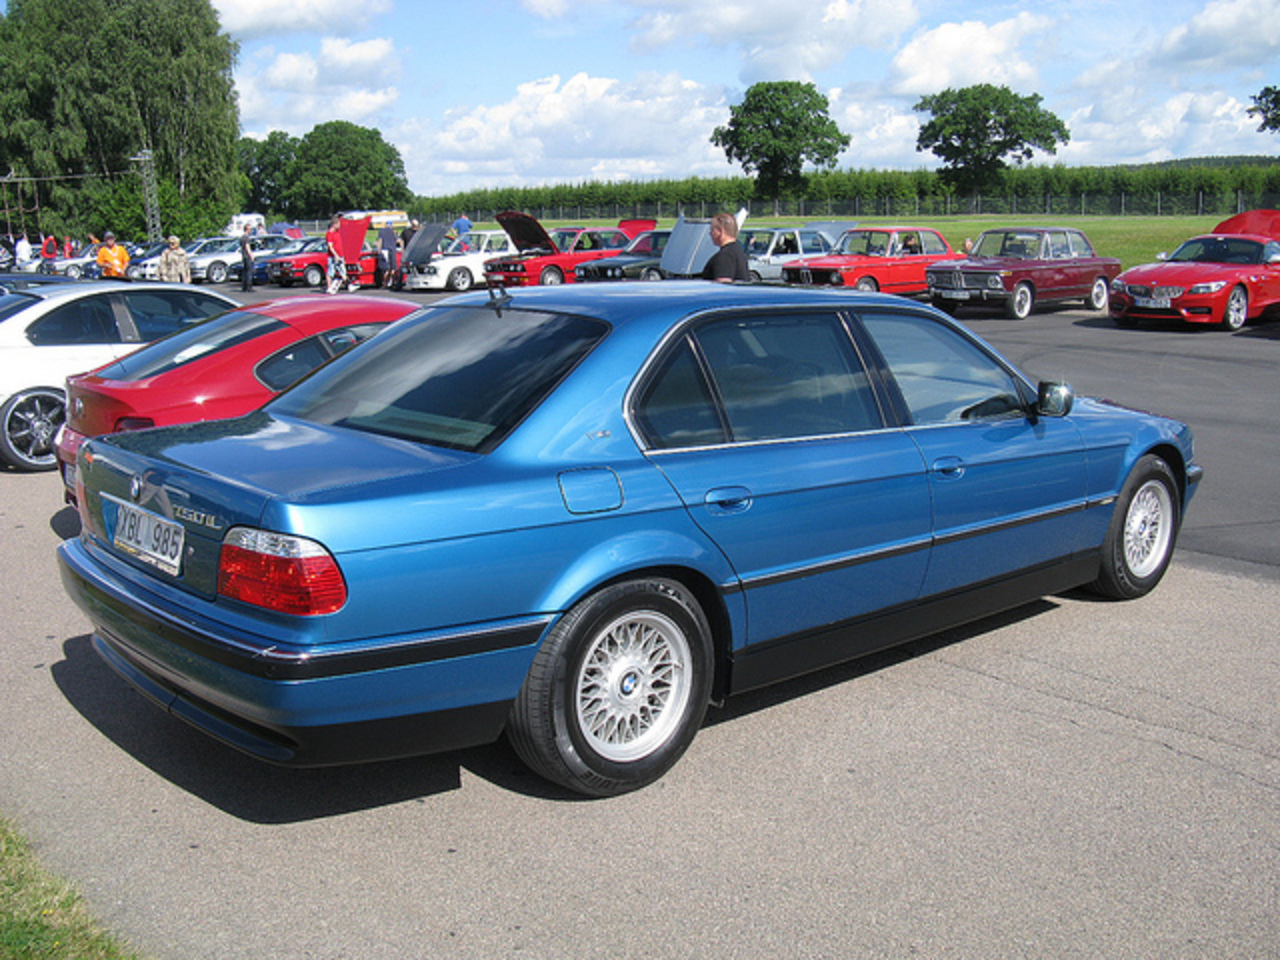 BMW 750iL Individual E38 | Flickr - Photo Sharing!